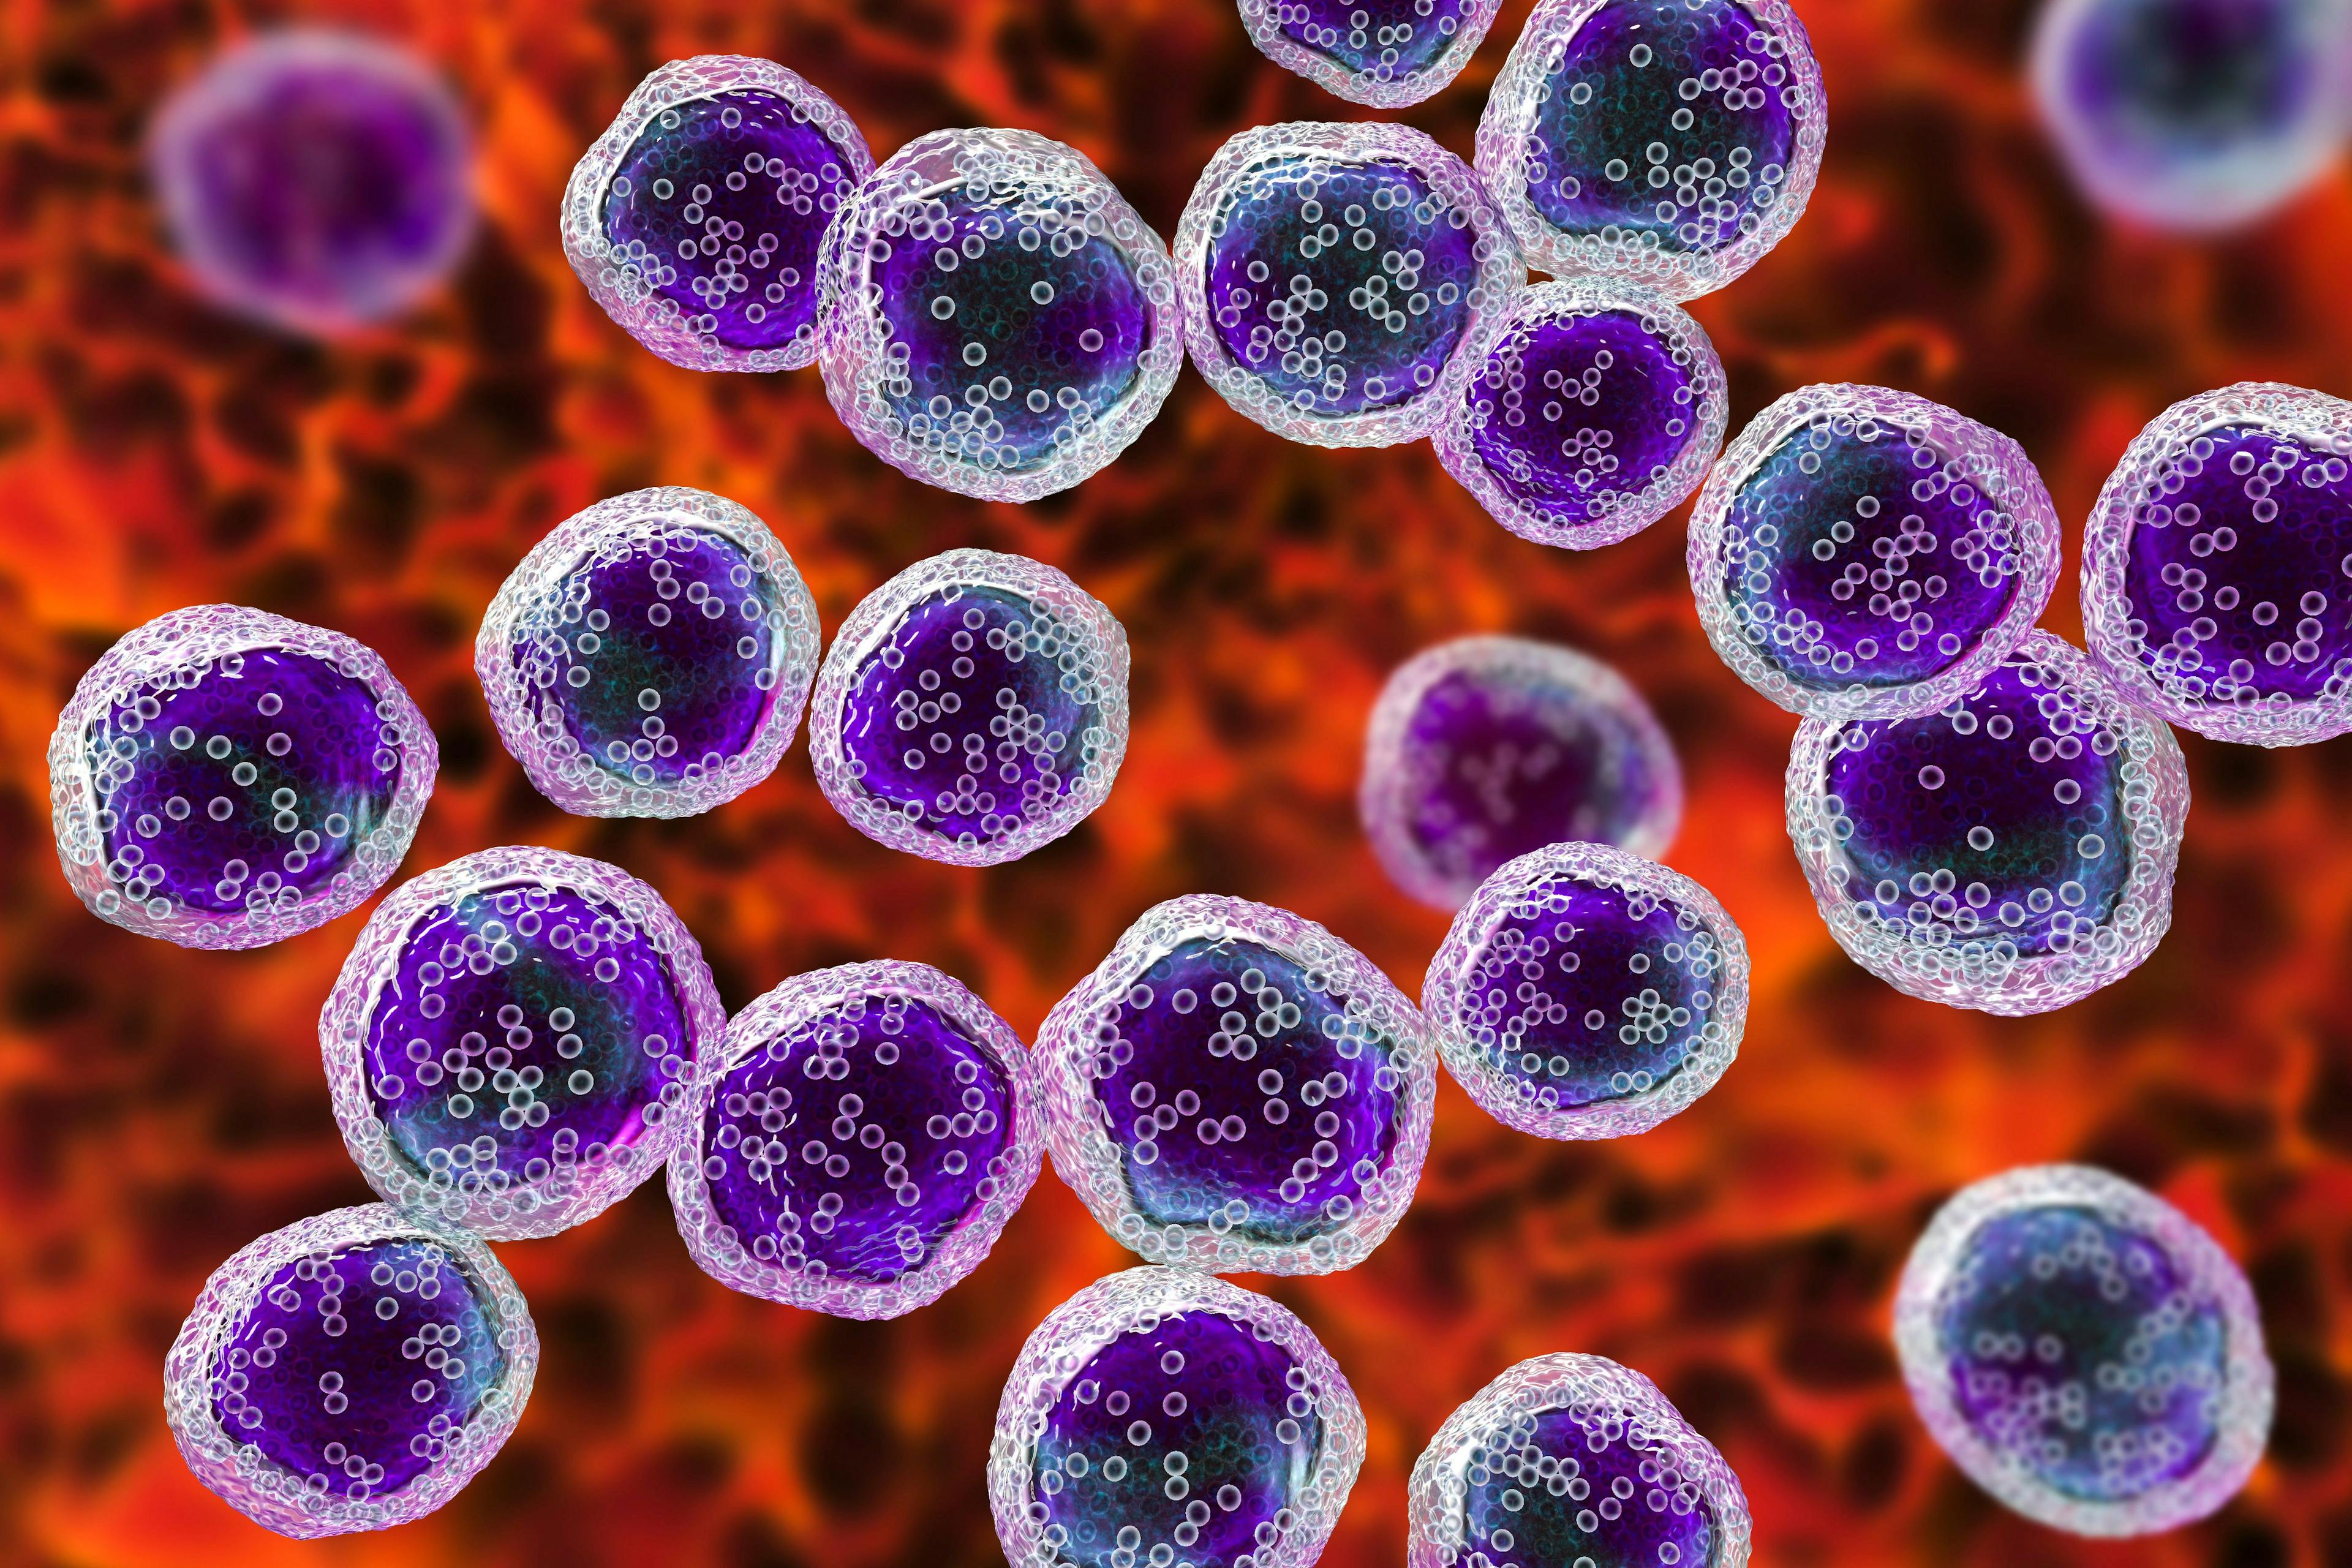 Burkitt's lymphoma cells, a cancer of the lymphatic system, monoclonal B-cell tumor, 3D illustration | Image Credit: © Dr_Microbe - www.stock.adobe.com